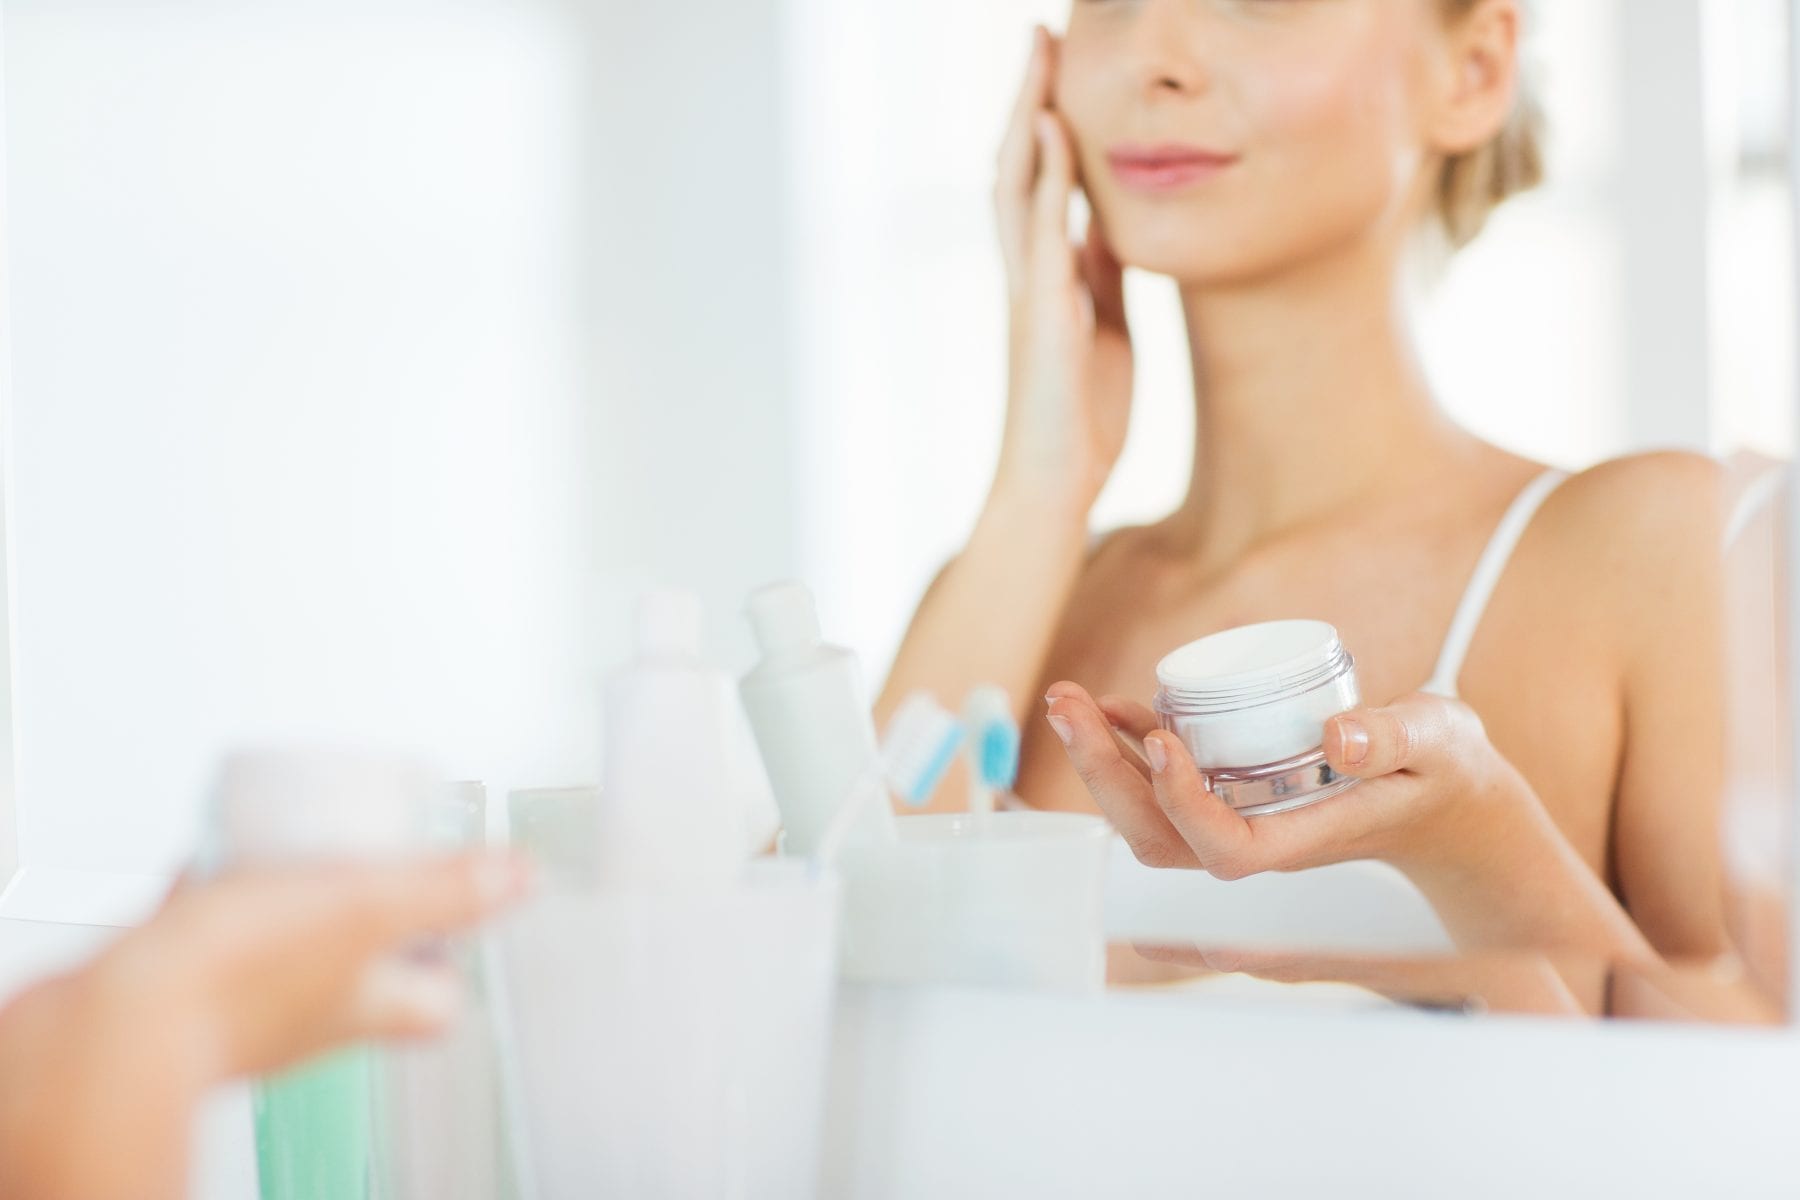 Top 5 Skincare Ingredients You Should Avoid 2